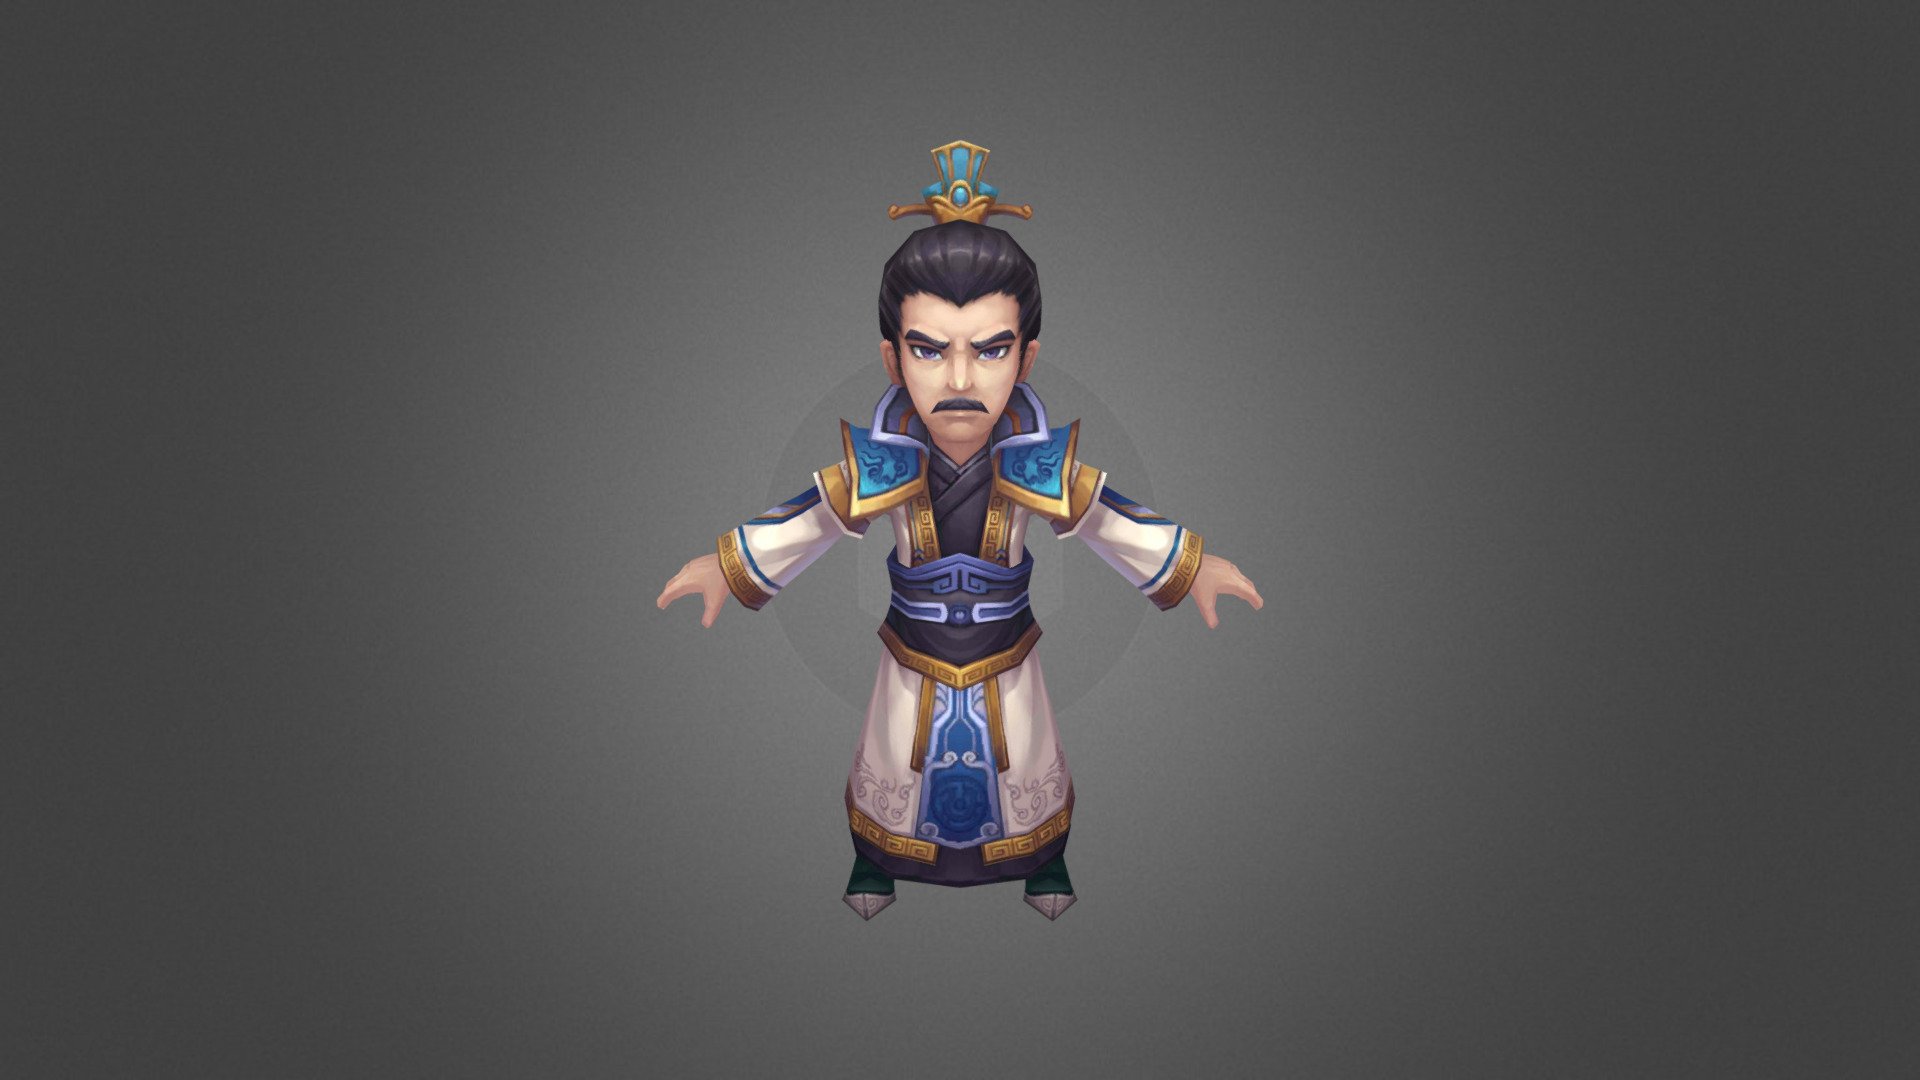 Chibi King 3D Model. You can use this model in real-time rendering, video games, cartoons, anime, and other CG arts.

This model is available for purchase from our website: https://cg-moon.com/product/character-1630/

Hope you like this model :)

For the list of full chibi characters pack, please take a look at https://cg-moon.com/product-tag/chibi/ - Chibi King 3D Model - 3D model by CG-Moon 3d model